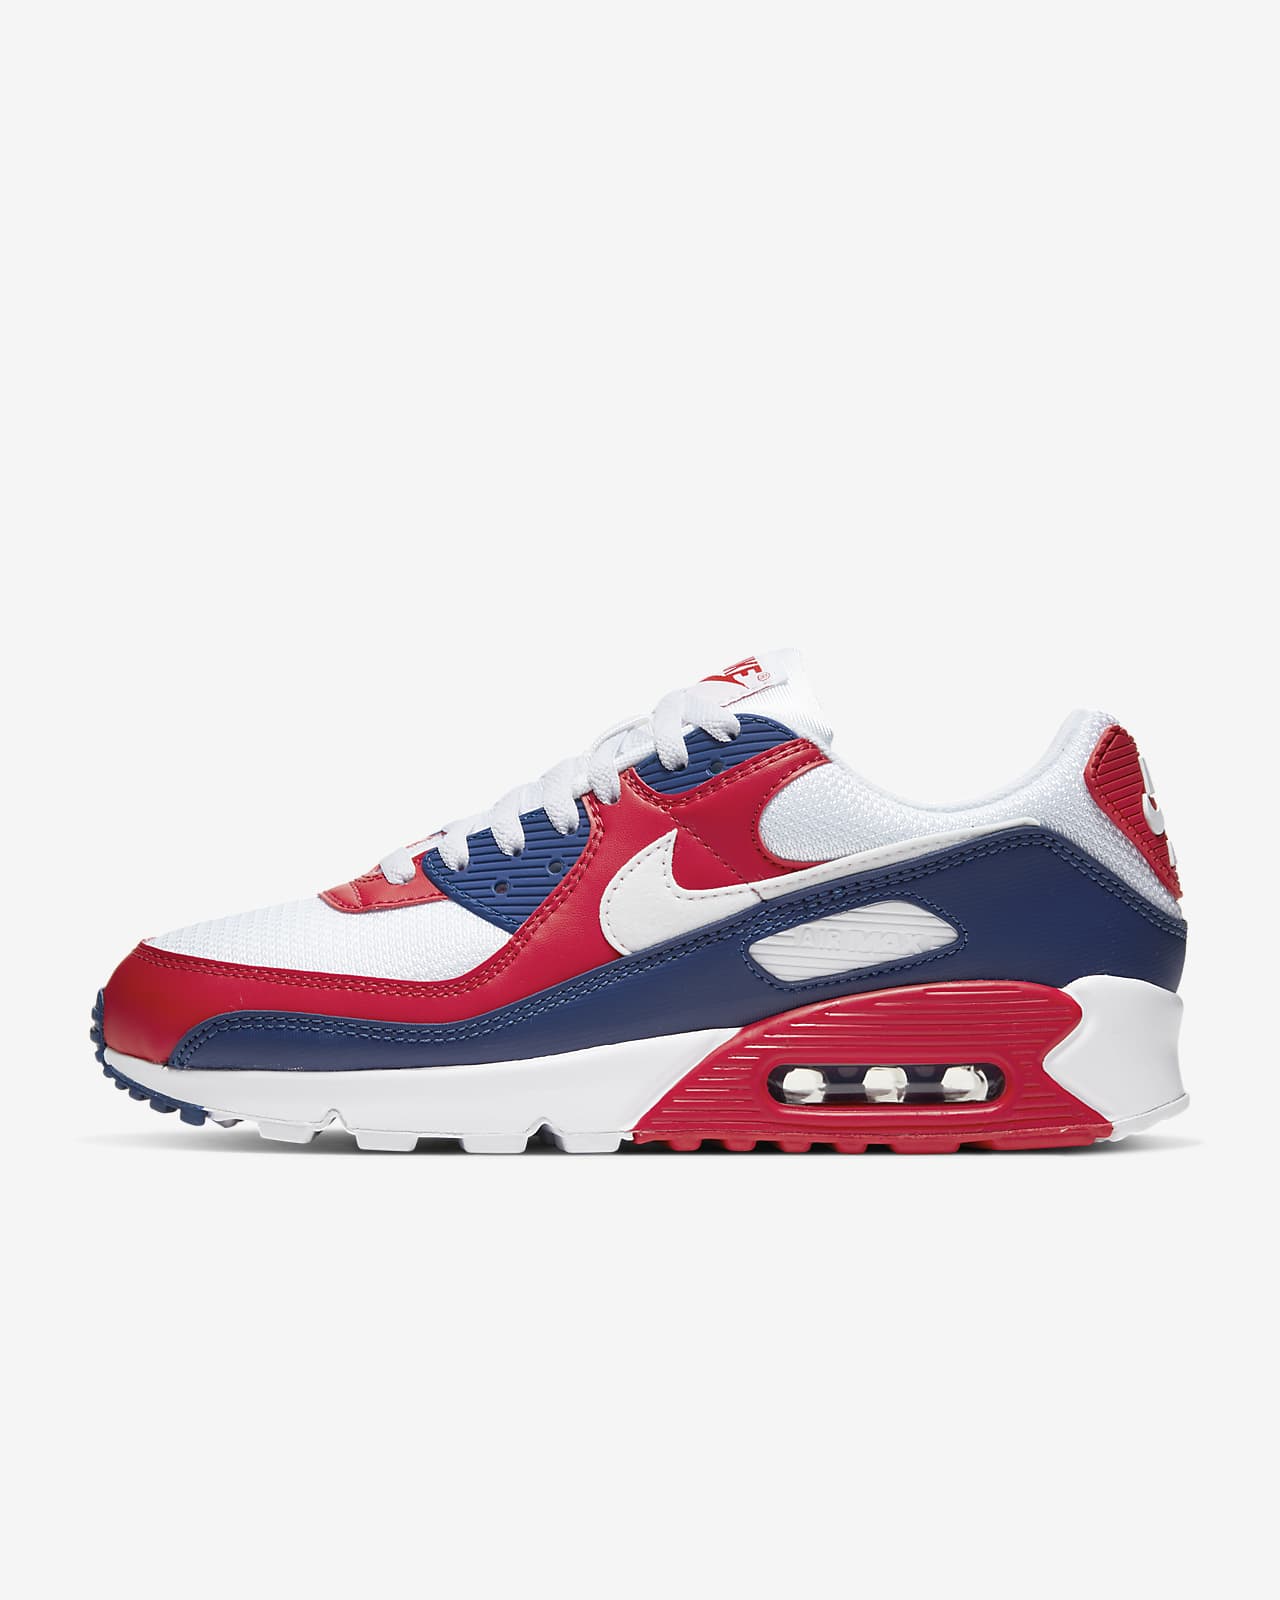 nikes red and blue